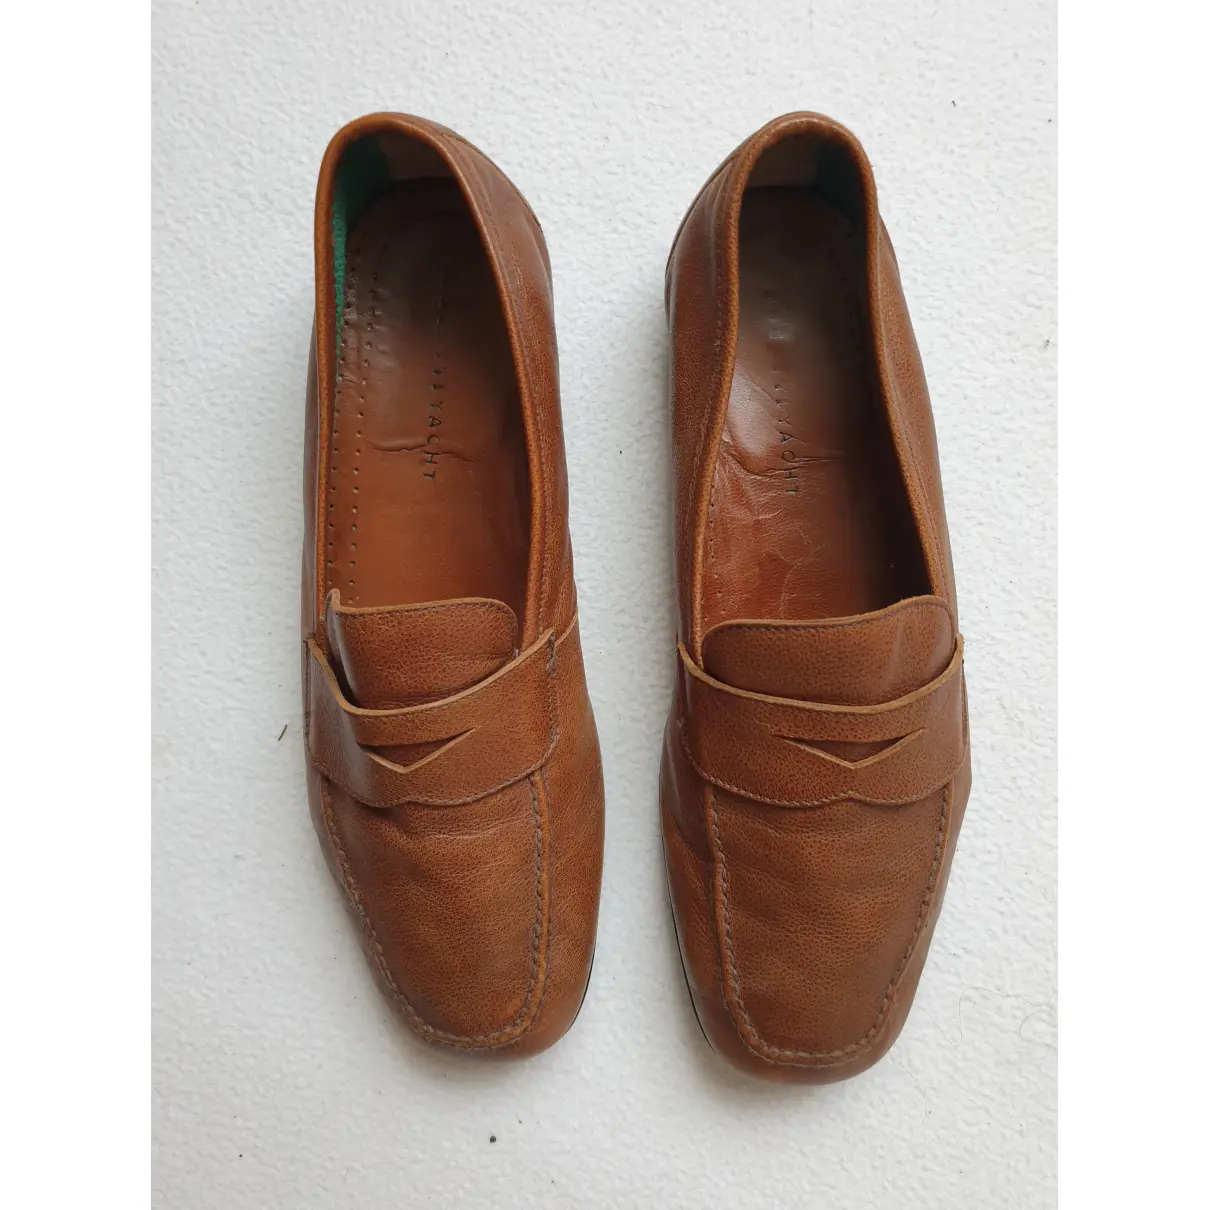 Buy Fratelli Rossetti Leather flats online